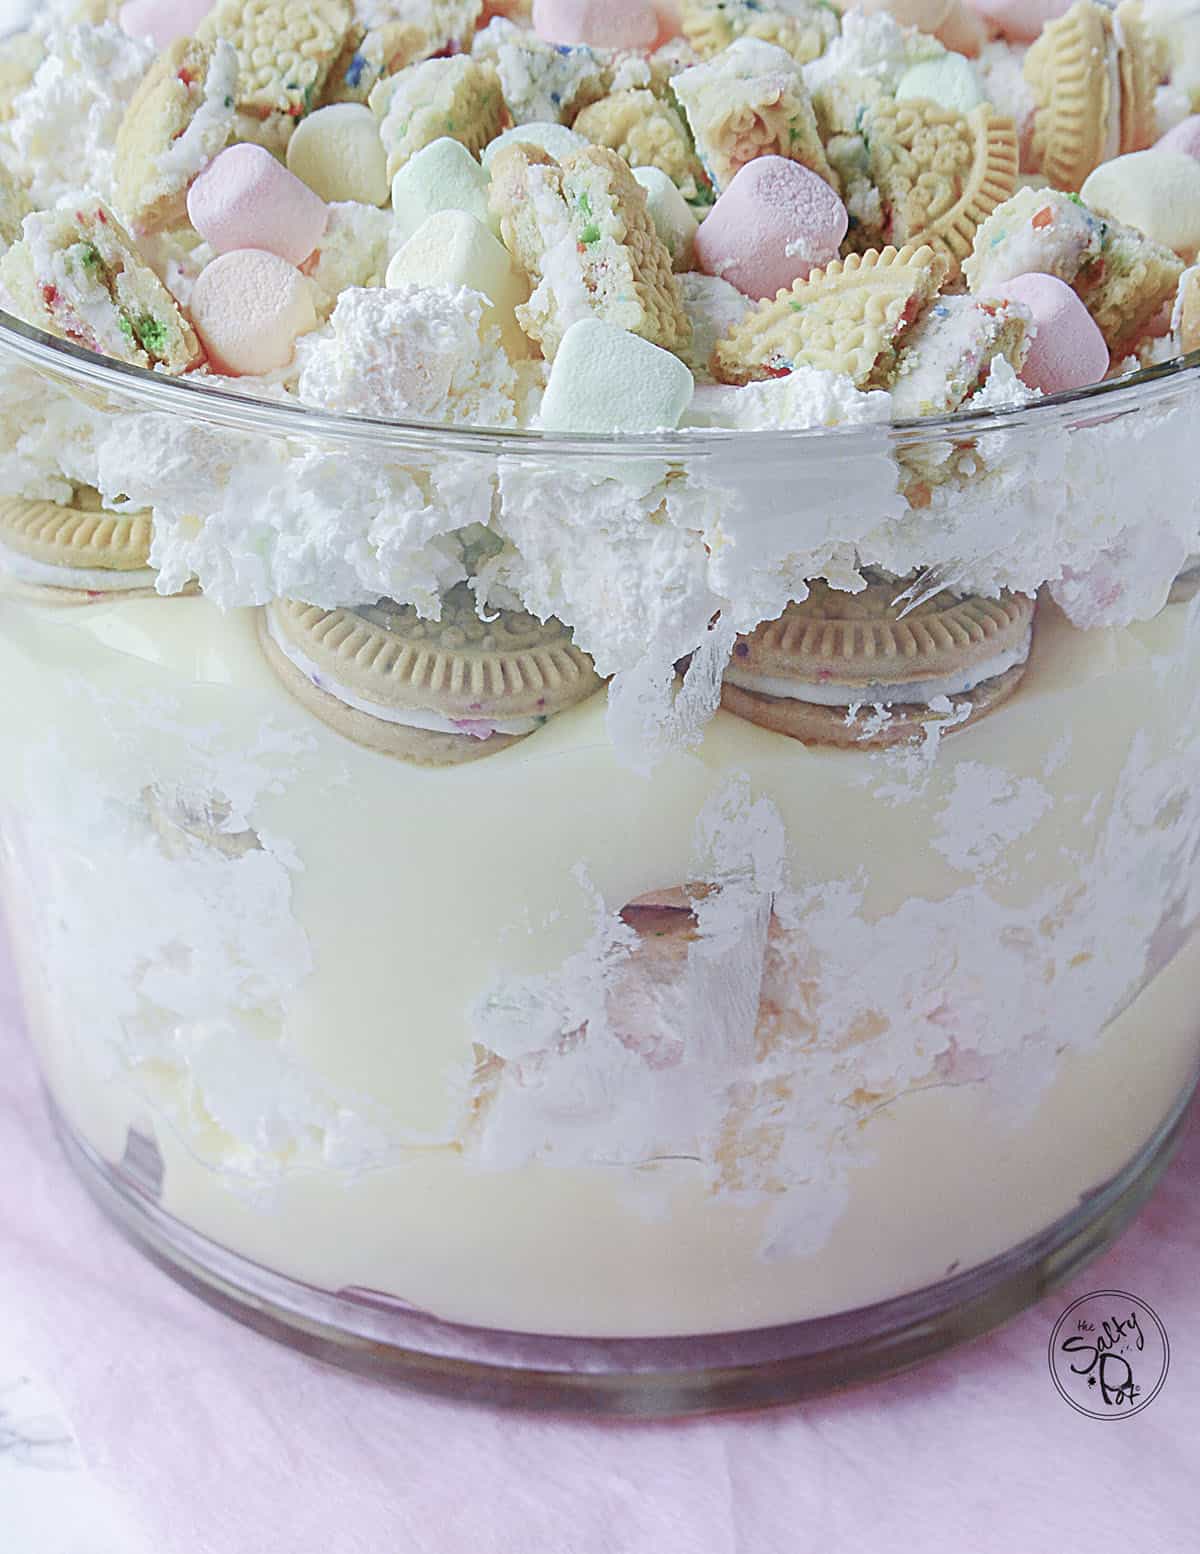 A side view of the layers in the cookie dessert, in the glass trifle bowl.